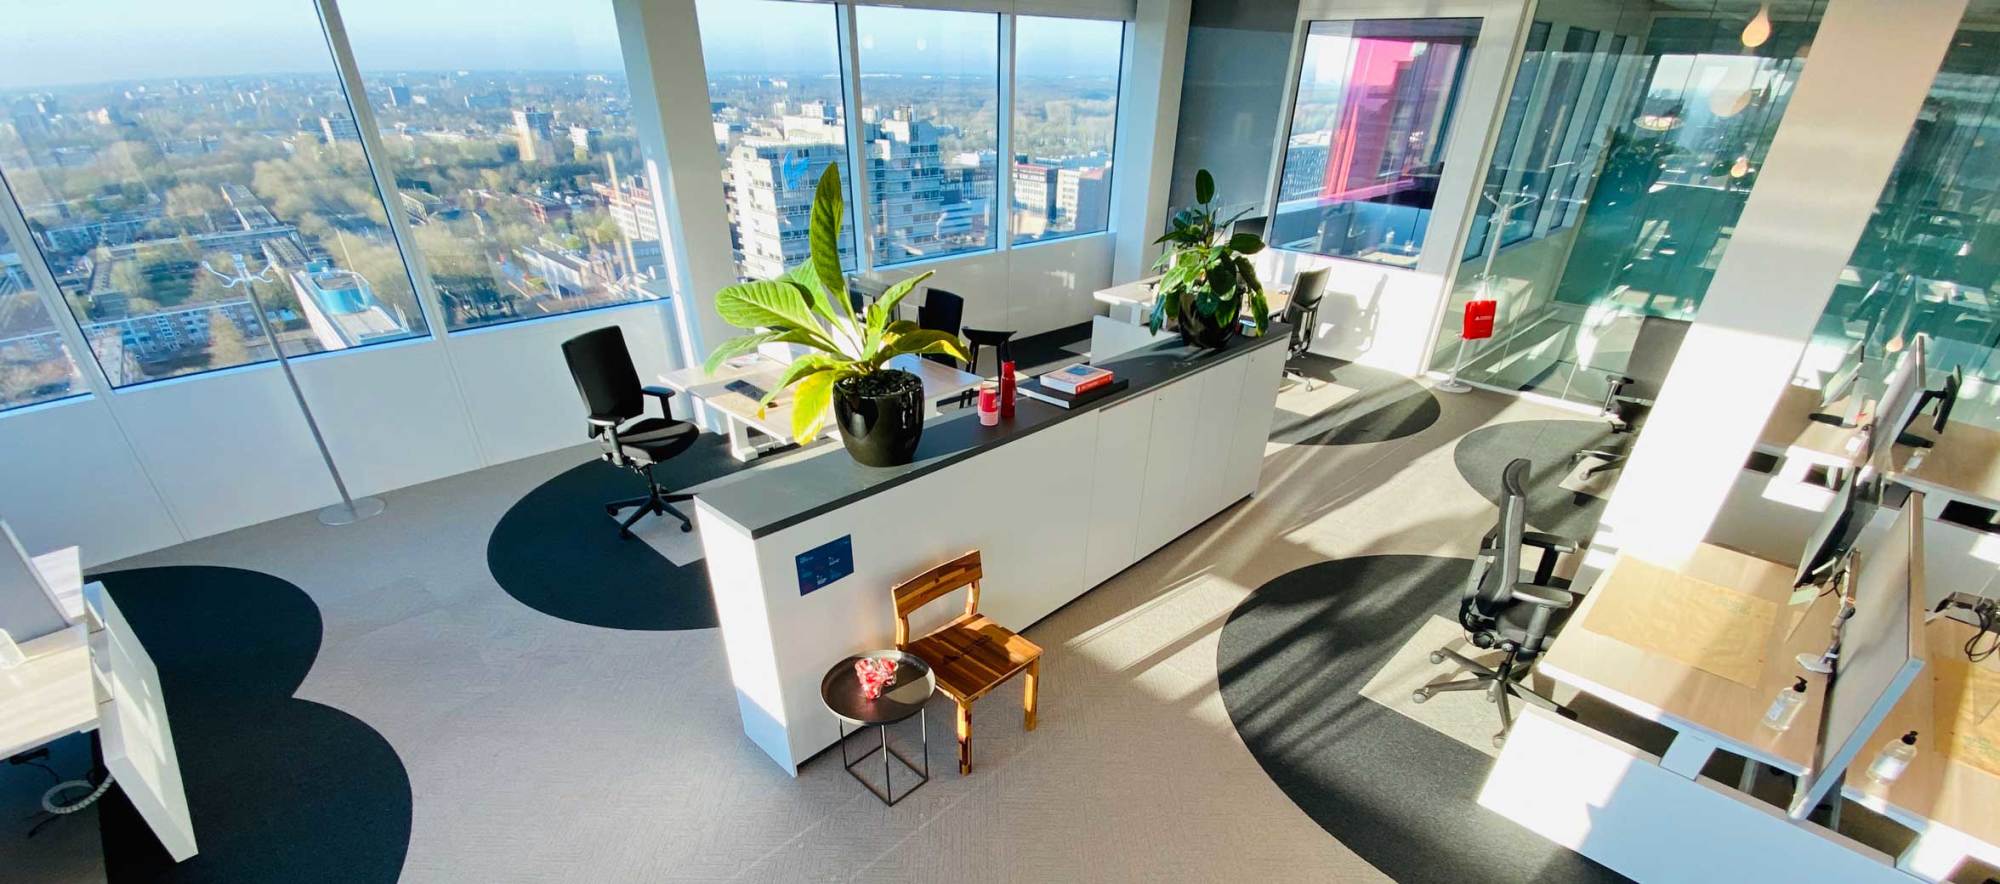 The Six Feet Office Concept